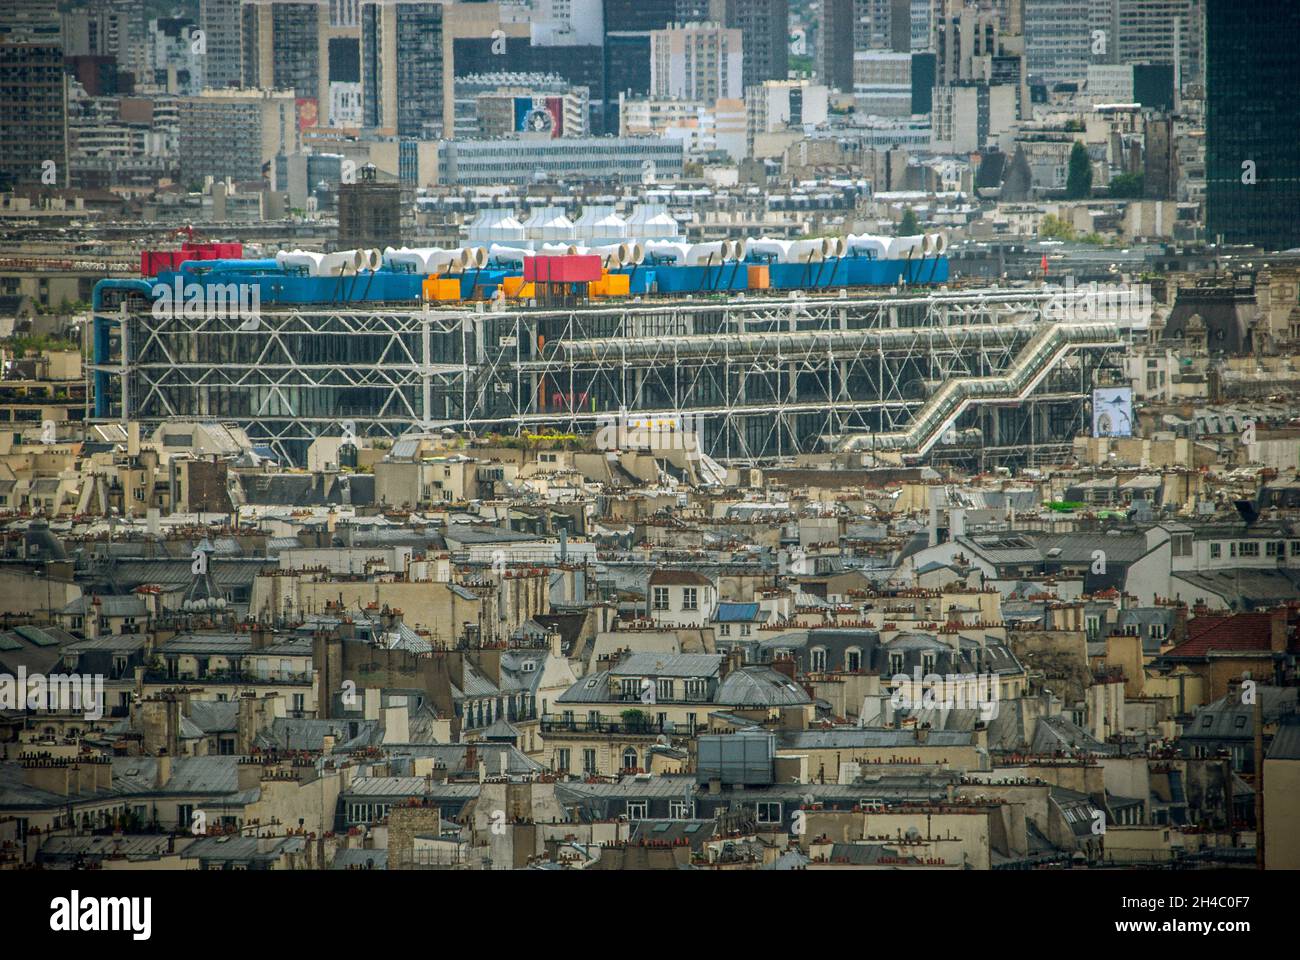 The Centre Pompidou seen over Parisian rooftops Stock Photo